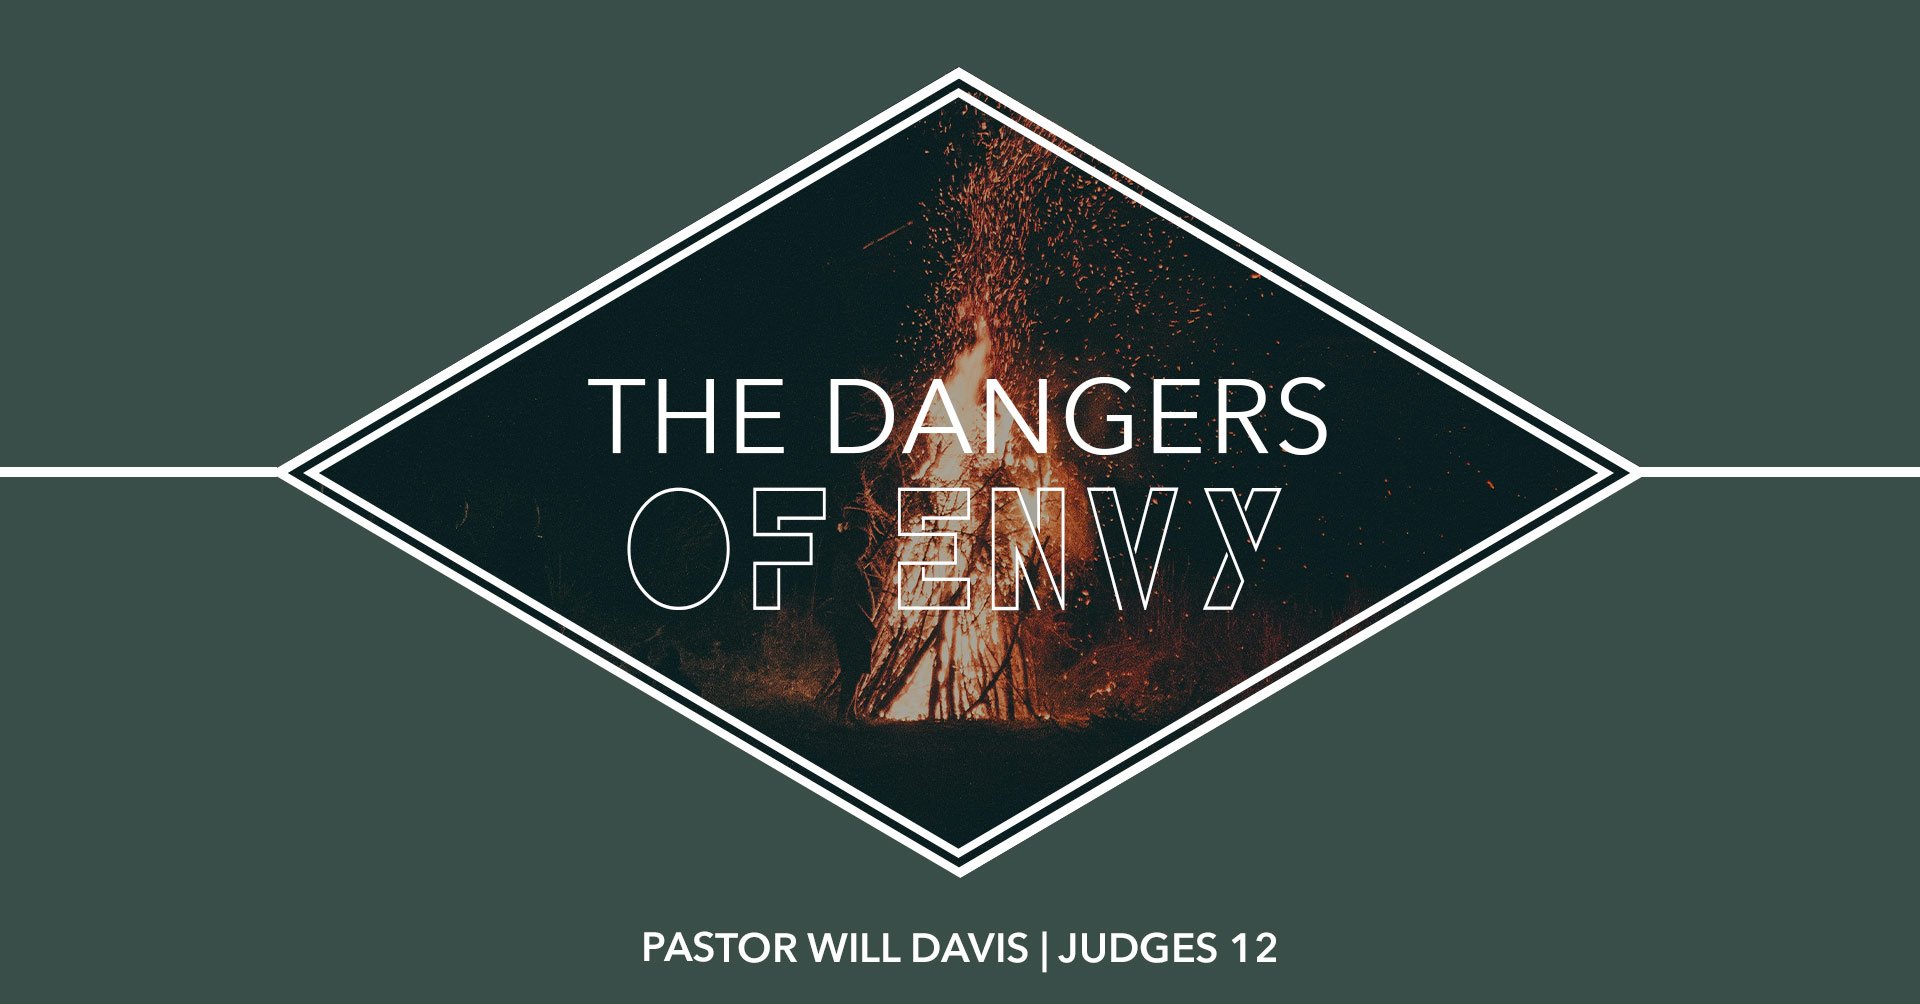 The Dangers of Envy